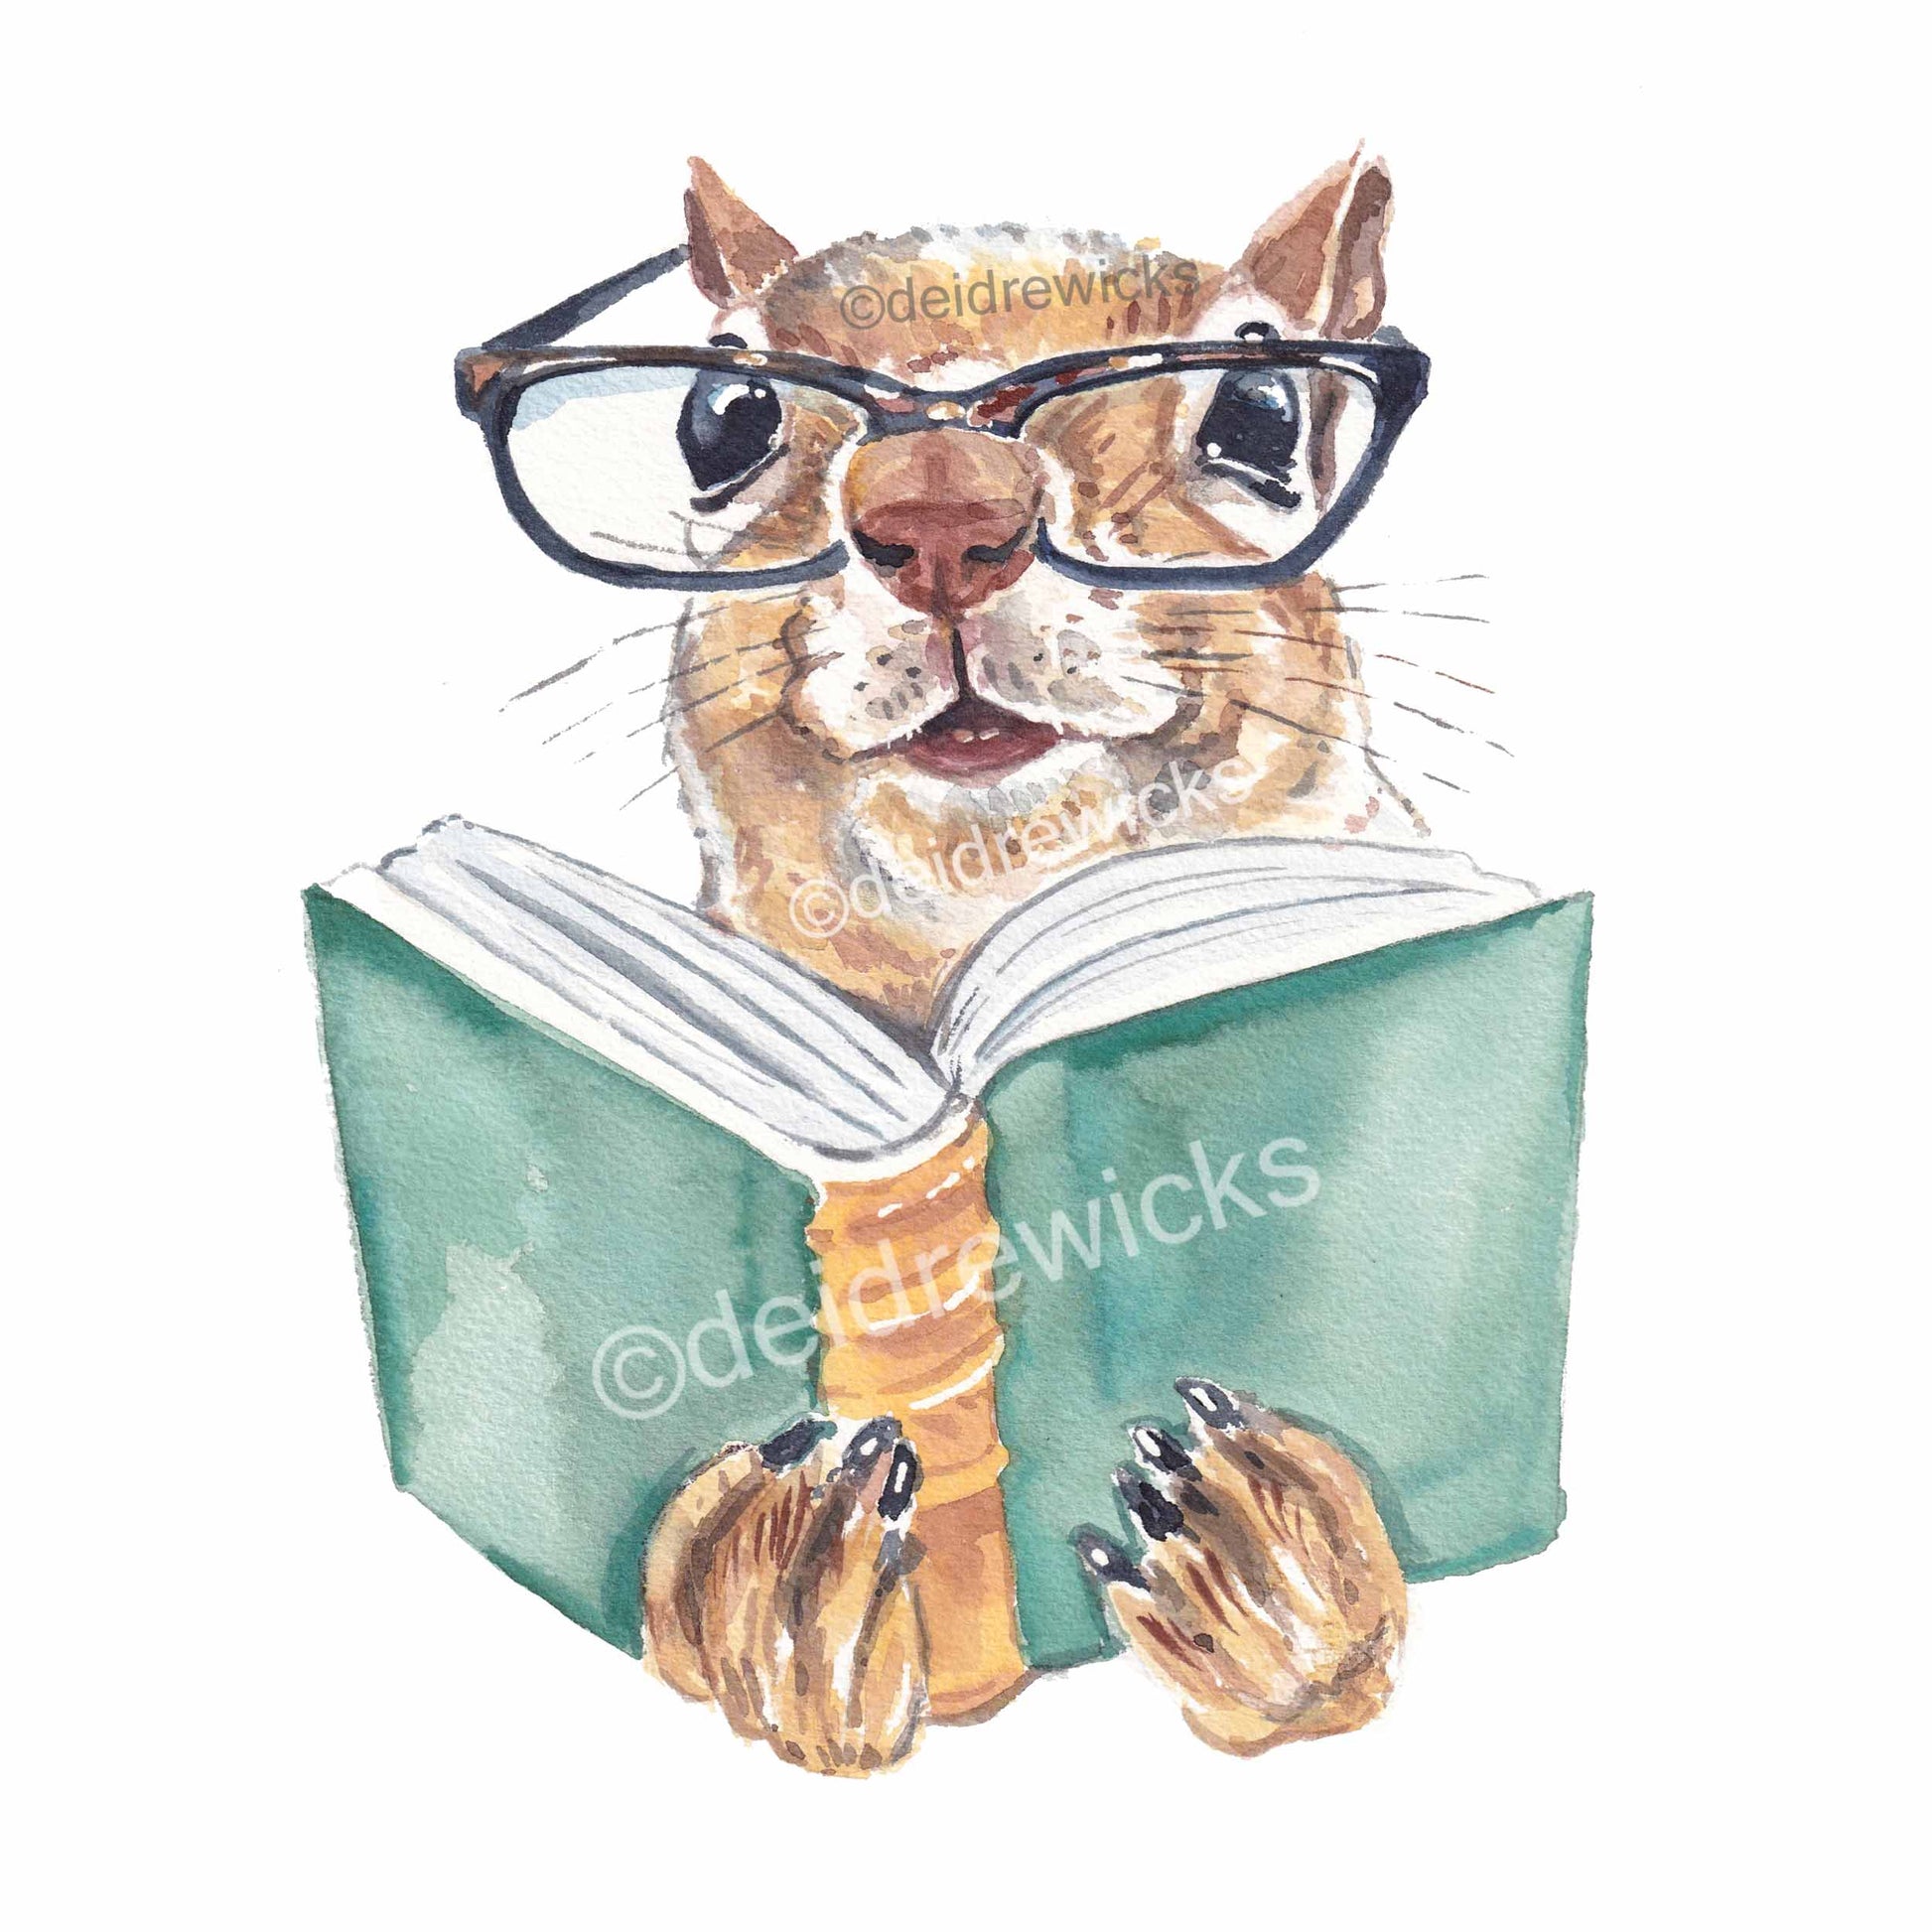 Watercolour painting of a squirrel wearing reading glasses while reading a book